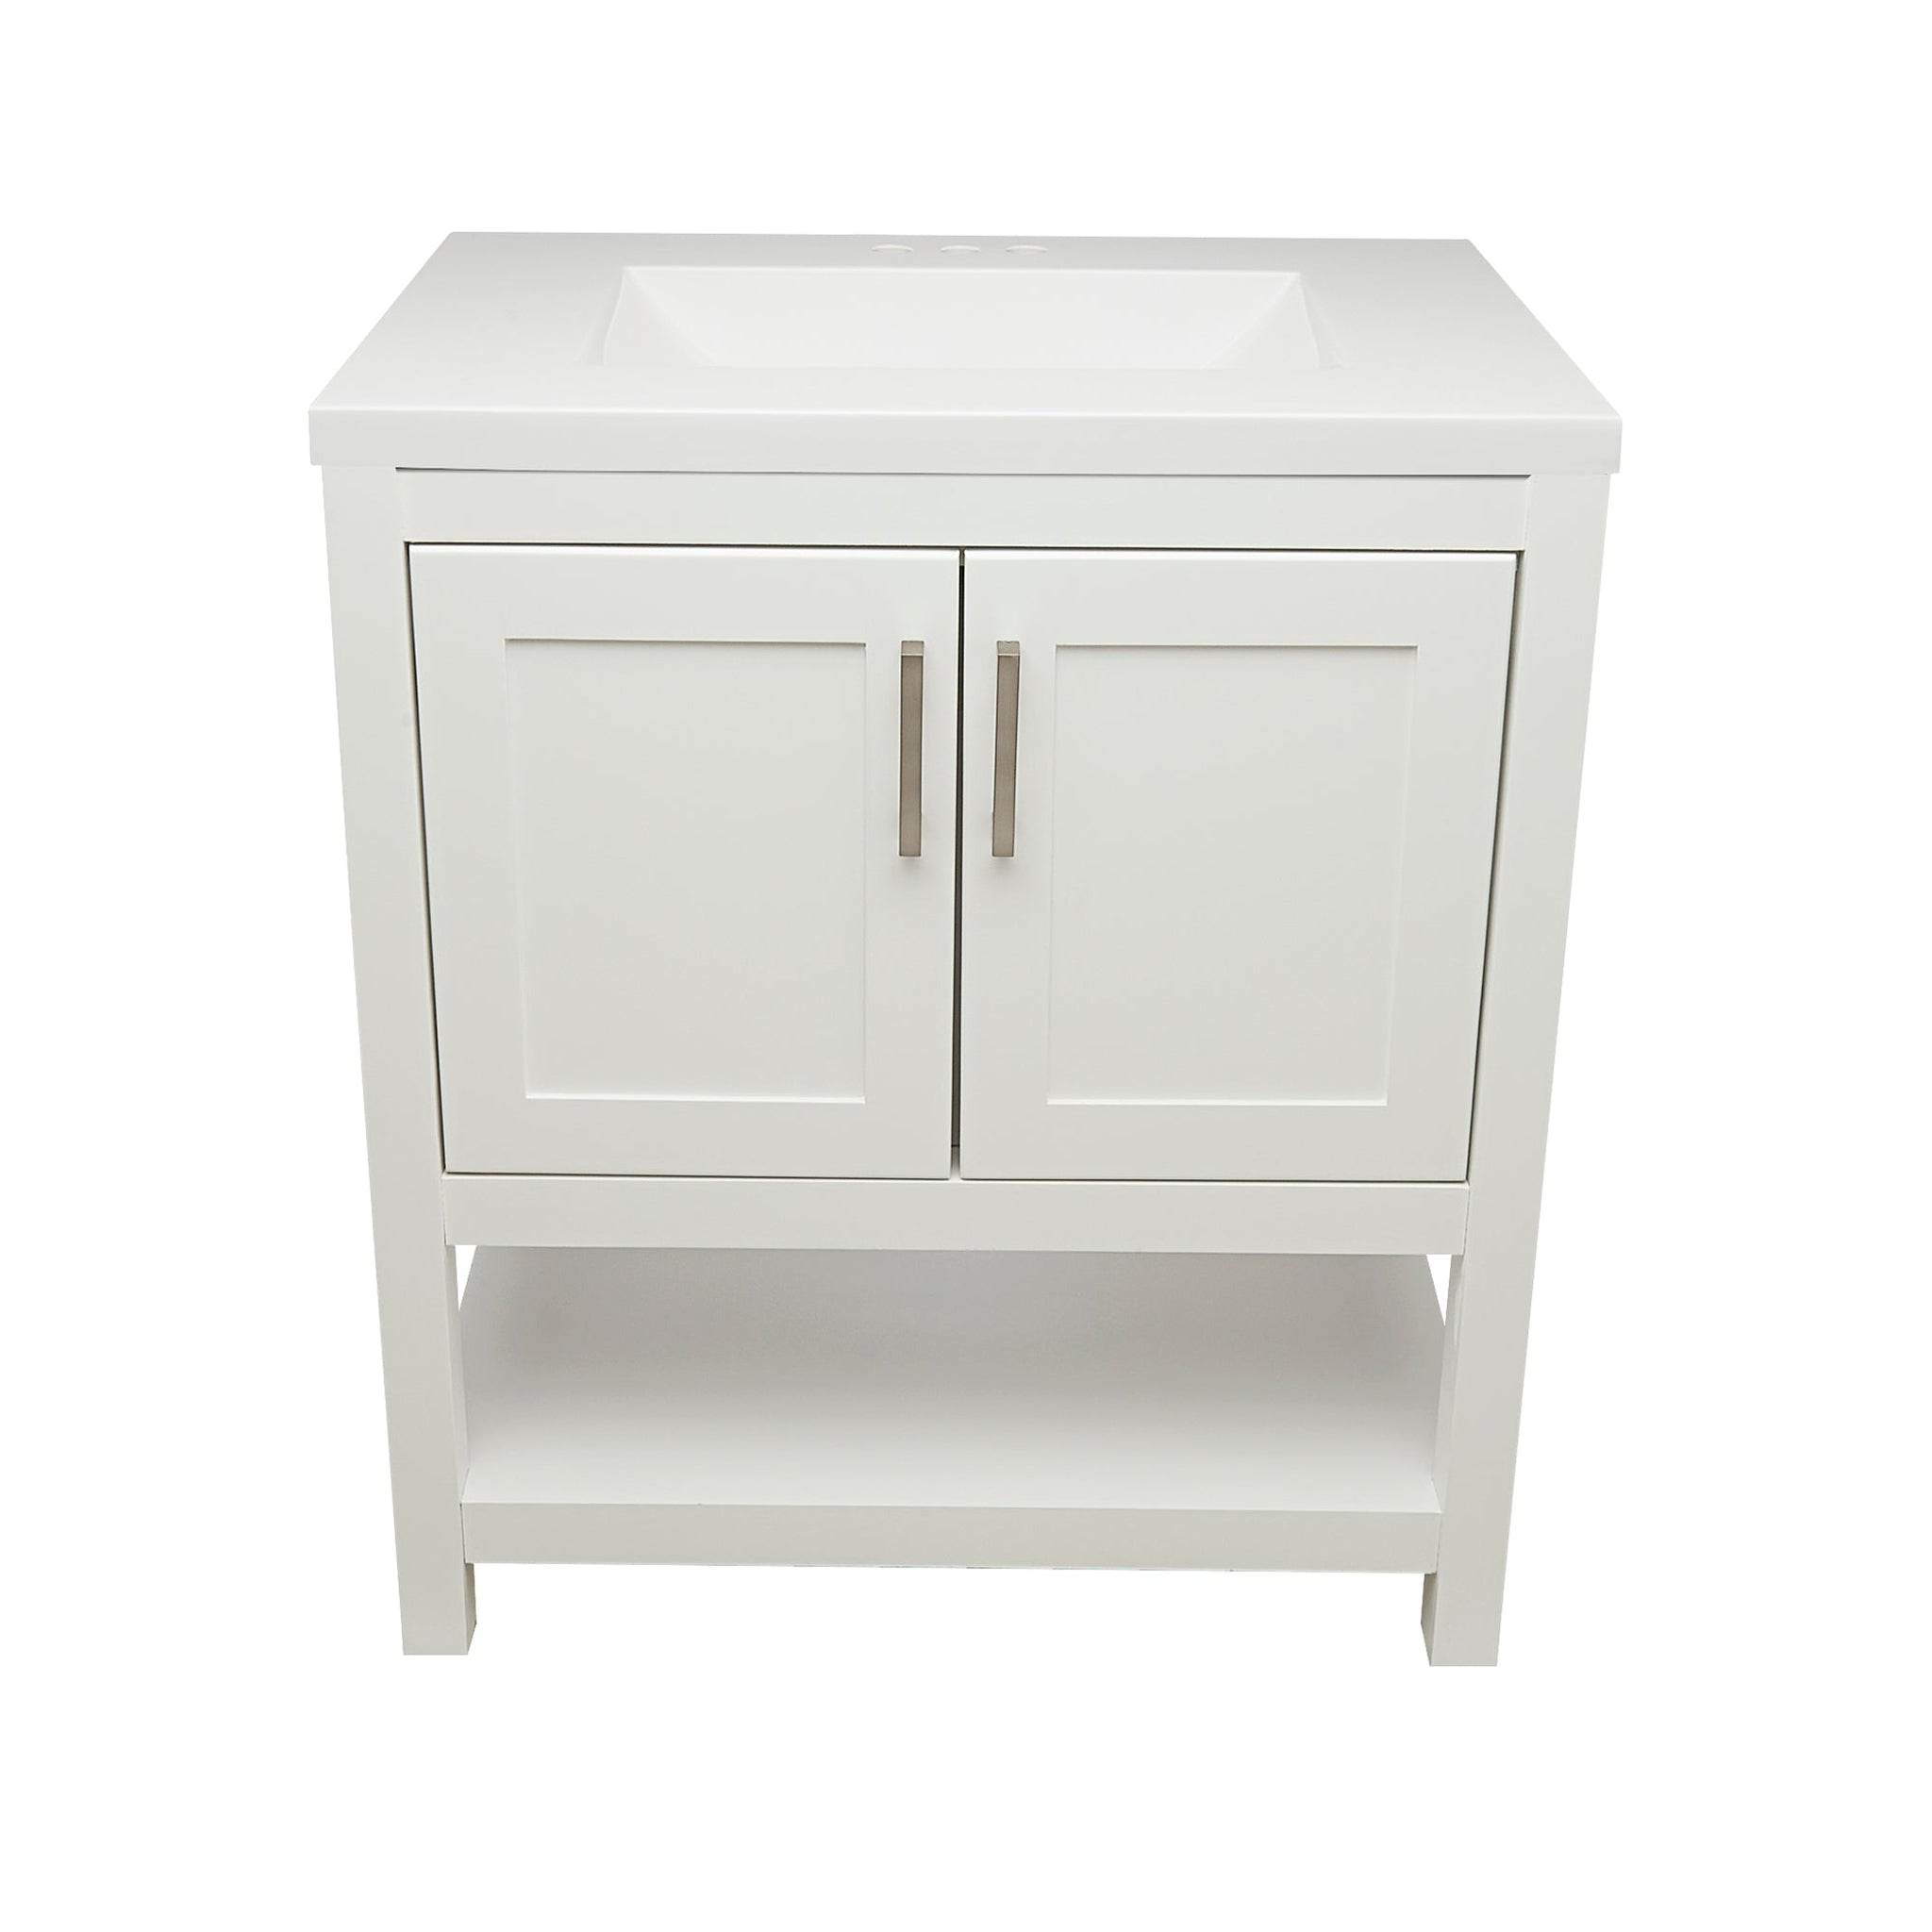 Ella's Bubbles, Ella's Bubbles Taos 31" White Bathroom Vanity With White Cultured Marble Top and Sink